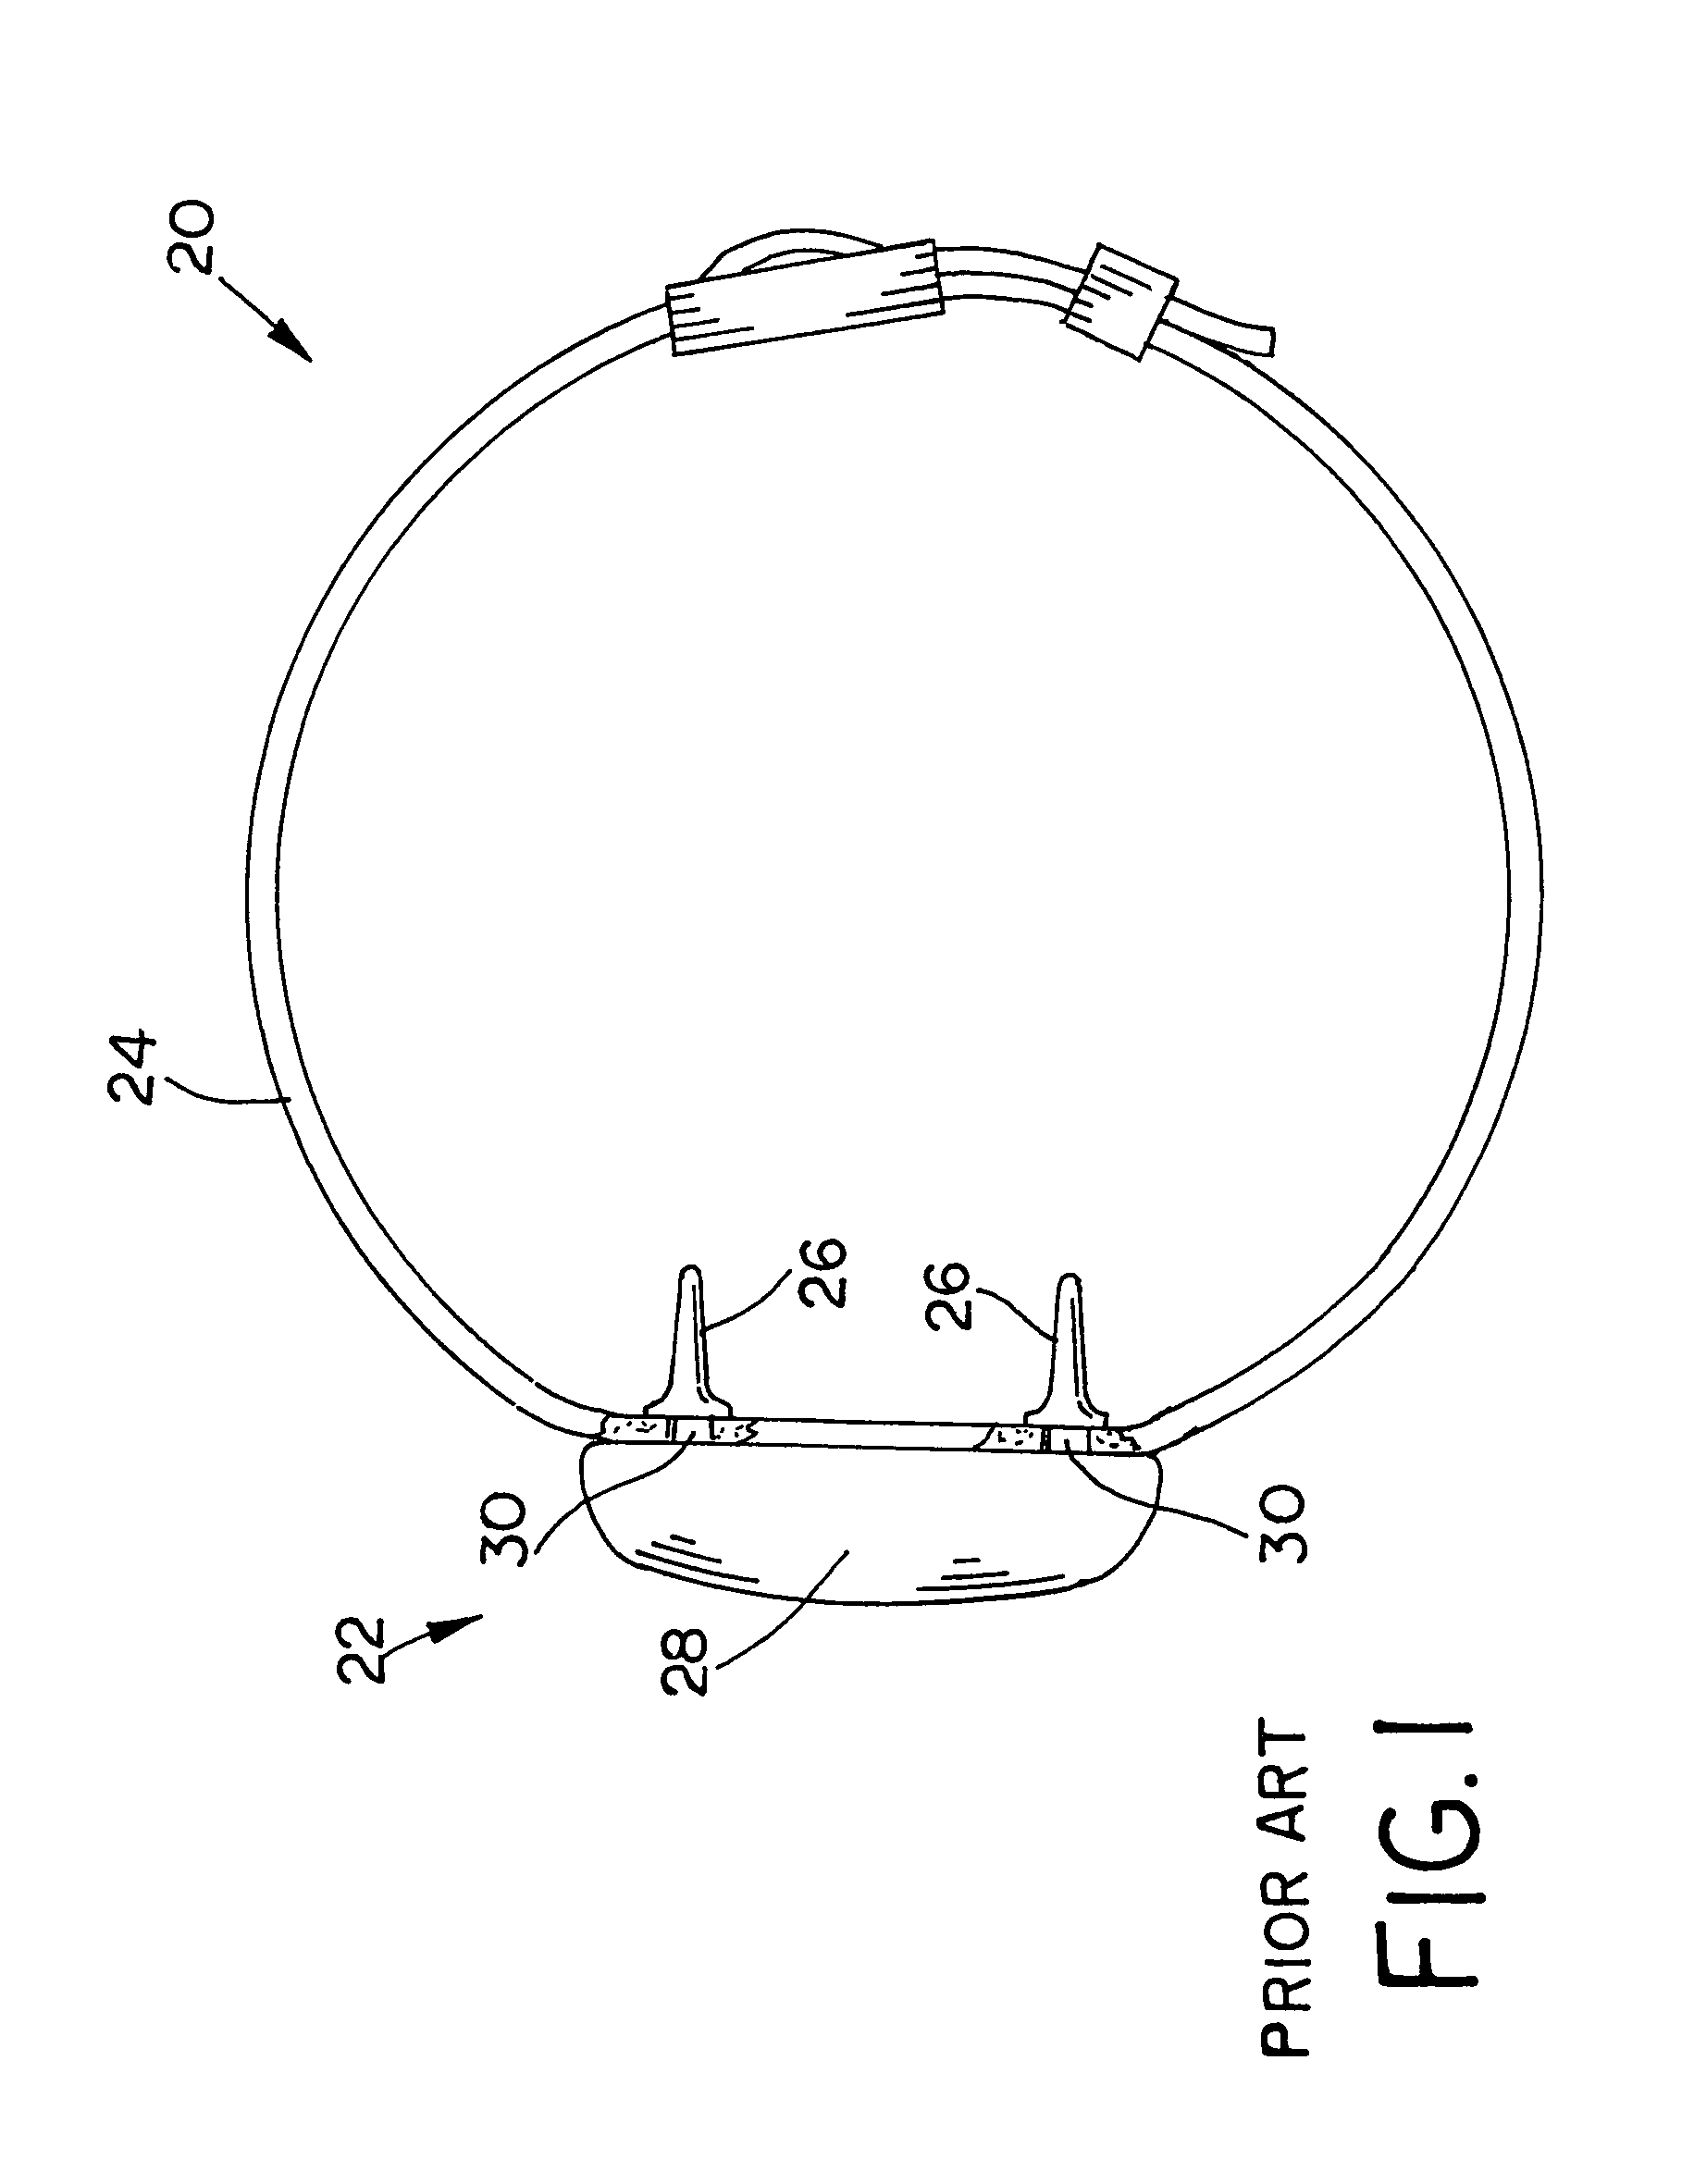 Method and apparatus for adjusting the correction level of an animal training receiver